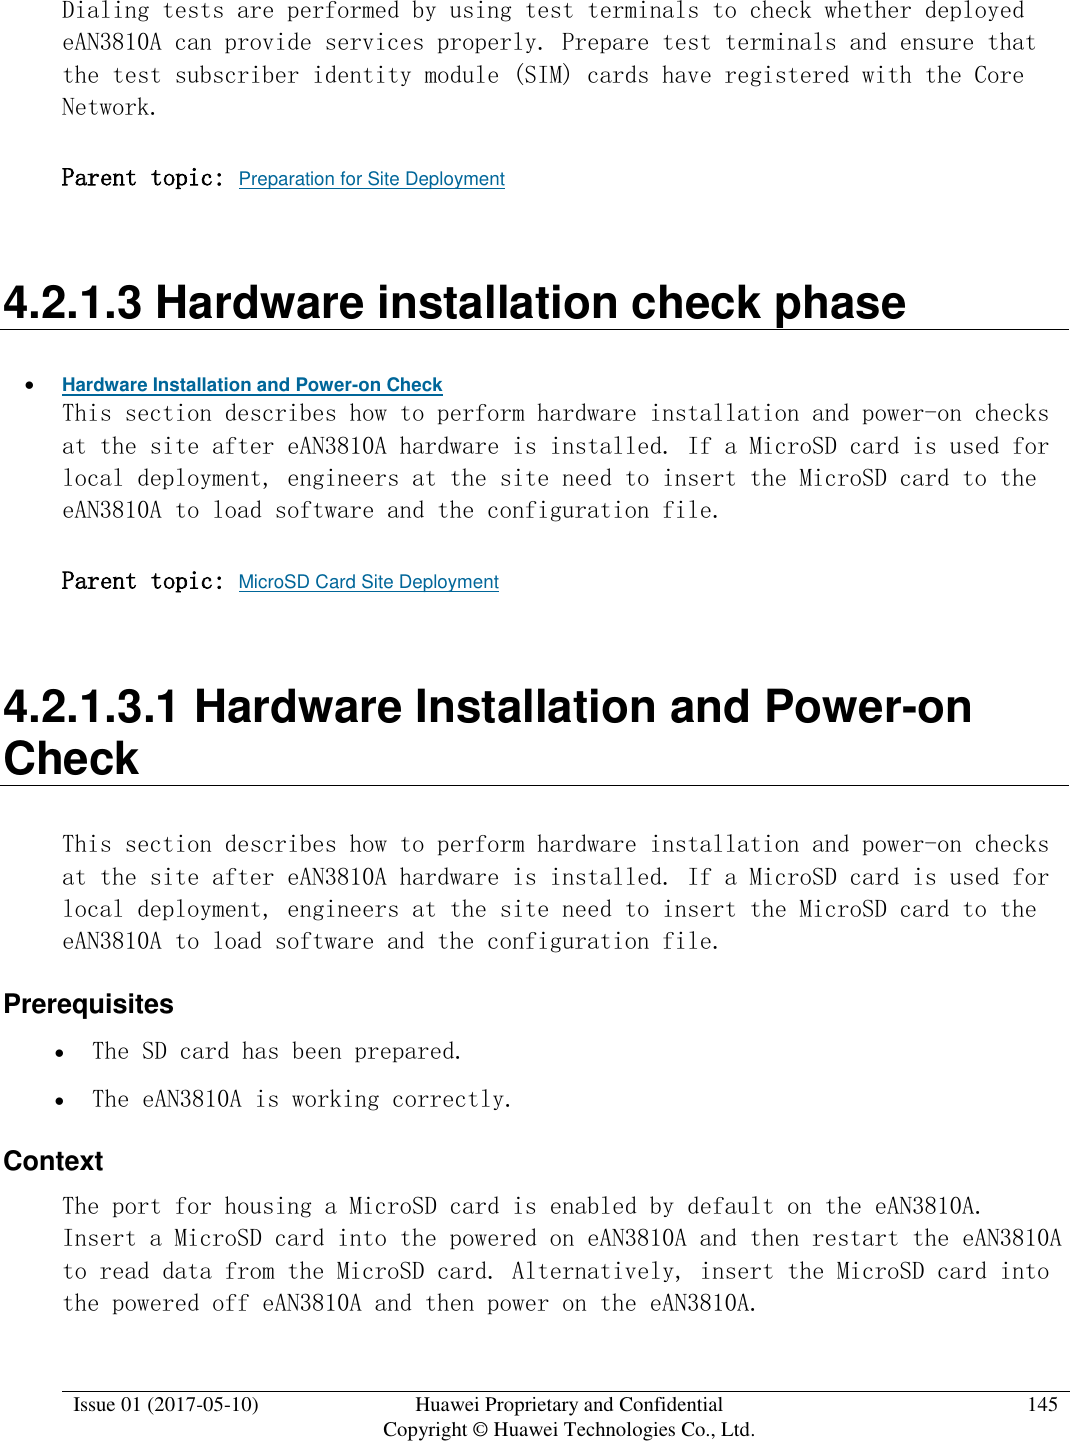  Issue 01 (2017-05-10) Huawei Proprietary and Confidential      Copyright © Huawei Technologies Co., Ltd. 145  Dialing tests are performed by using test terminals to check whether deployed eAN3810A can provide services properly. Prepare test terminals and ensure that the test subscriber identity module (SIM) cards have registered with the Core Network. Parent topic: Preparation for Site Deployment 4.2.1.3 Hardware installation check phase  Hardware Installation and Power-on Check This section describes how to perform hardware installation and power-on checks at the site after eAN3810A hardware is installed. If a MicroSD card is used for local deployment, engineers at the site need to insert the MicroSD card to the eAN3810A to load software and the configuration file.  Parent topic: MicroSD Card Site Deployment 4.2.1.3.1 Hardware Installation and Power-on Check This section describes how to perform hardware installation and power-on checks at the site after eAN3810A hardware is installed. If a MicroSD card is used for local deployment, engineers at the site need to insert the MicroSD card to the eAN3810A to load software and the configuration file.  Prerequisites  The SD card has been prepared.  The eAN3810A is working correctly. Context The port for housing a MicroSD card is enabled by default on the eAN3810A. Insert a MicroSD card into the powered on eAN3810A and then restart the eAN3810A to read data from the MicroSD card. Alternatively, insert the MicroSD card into the powered off eAN3810A and then power on the eAN3810A.  